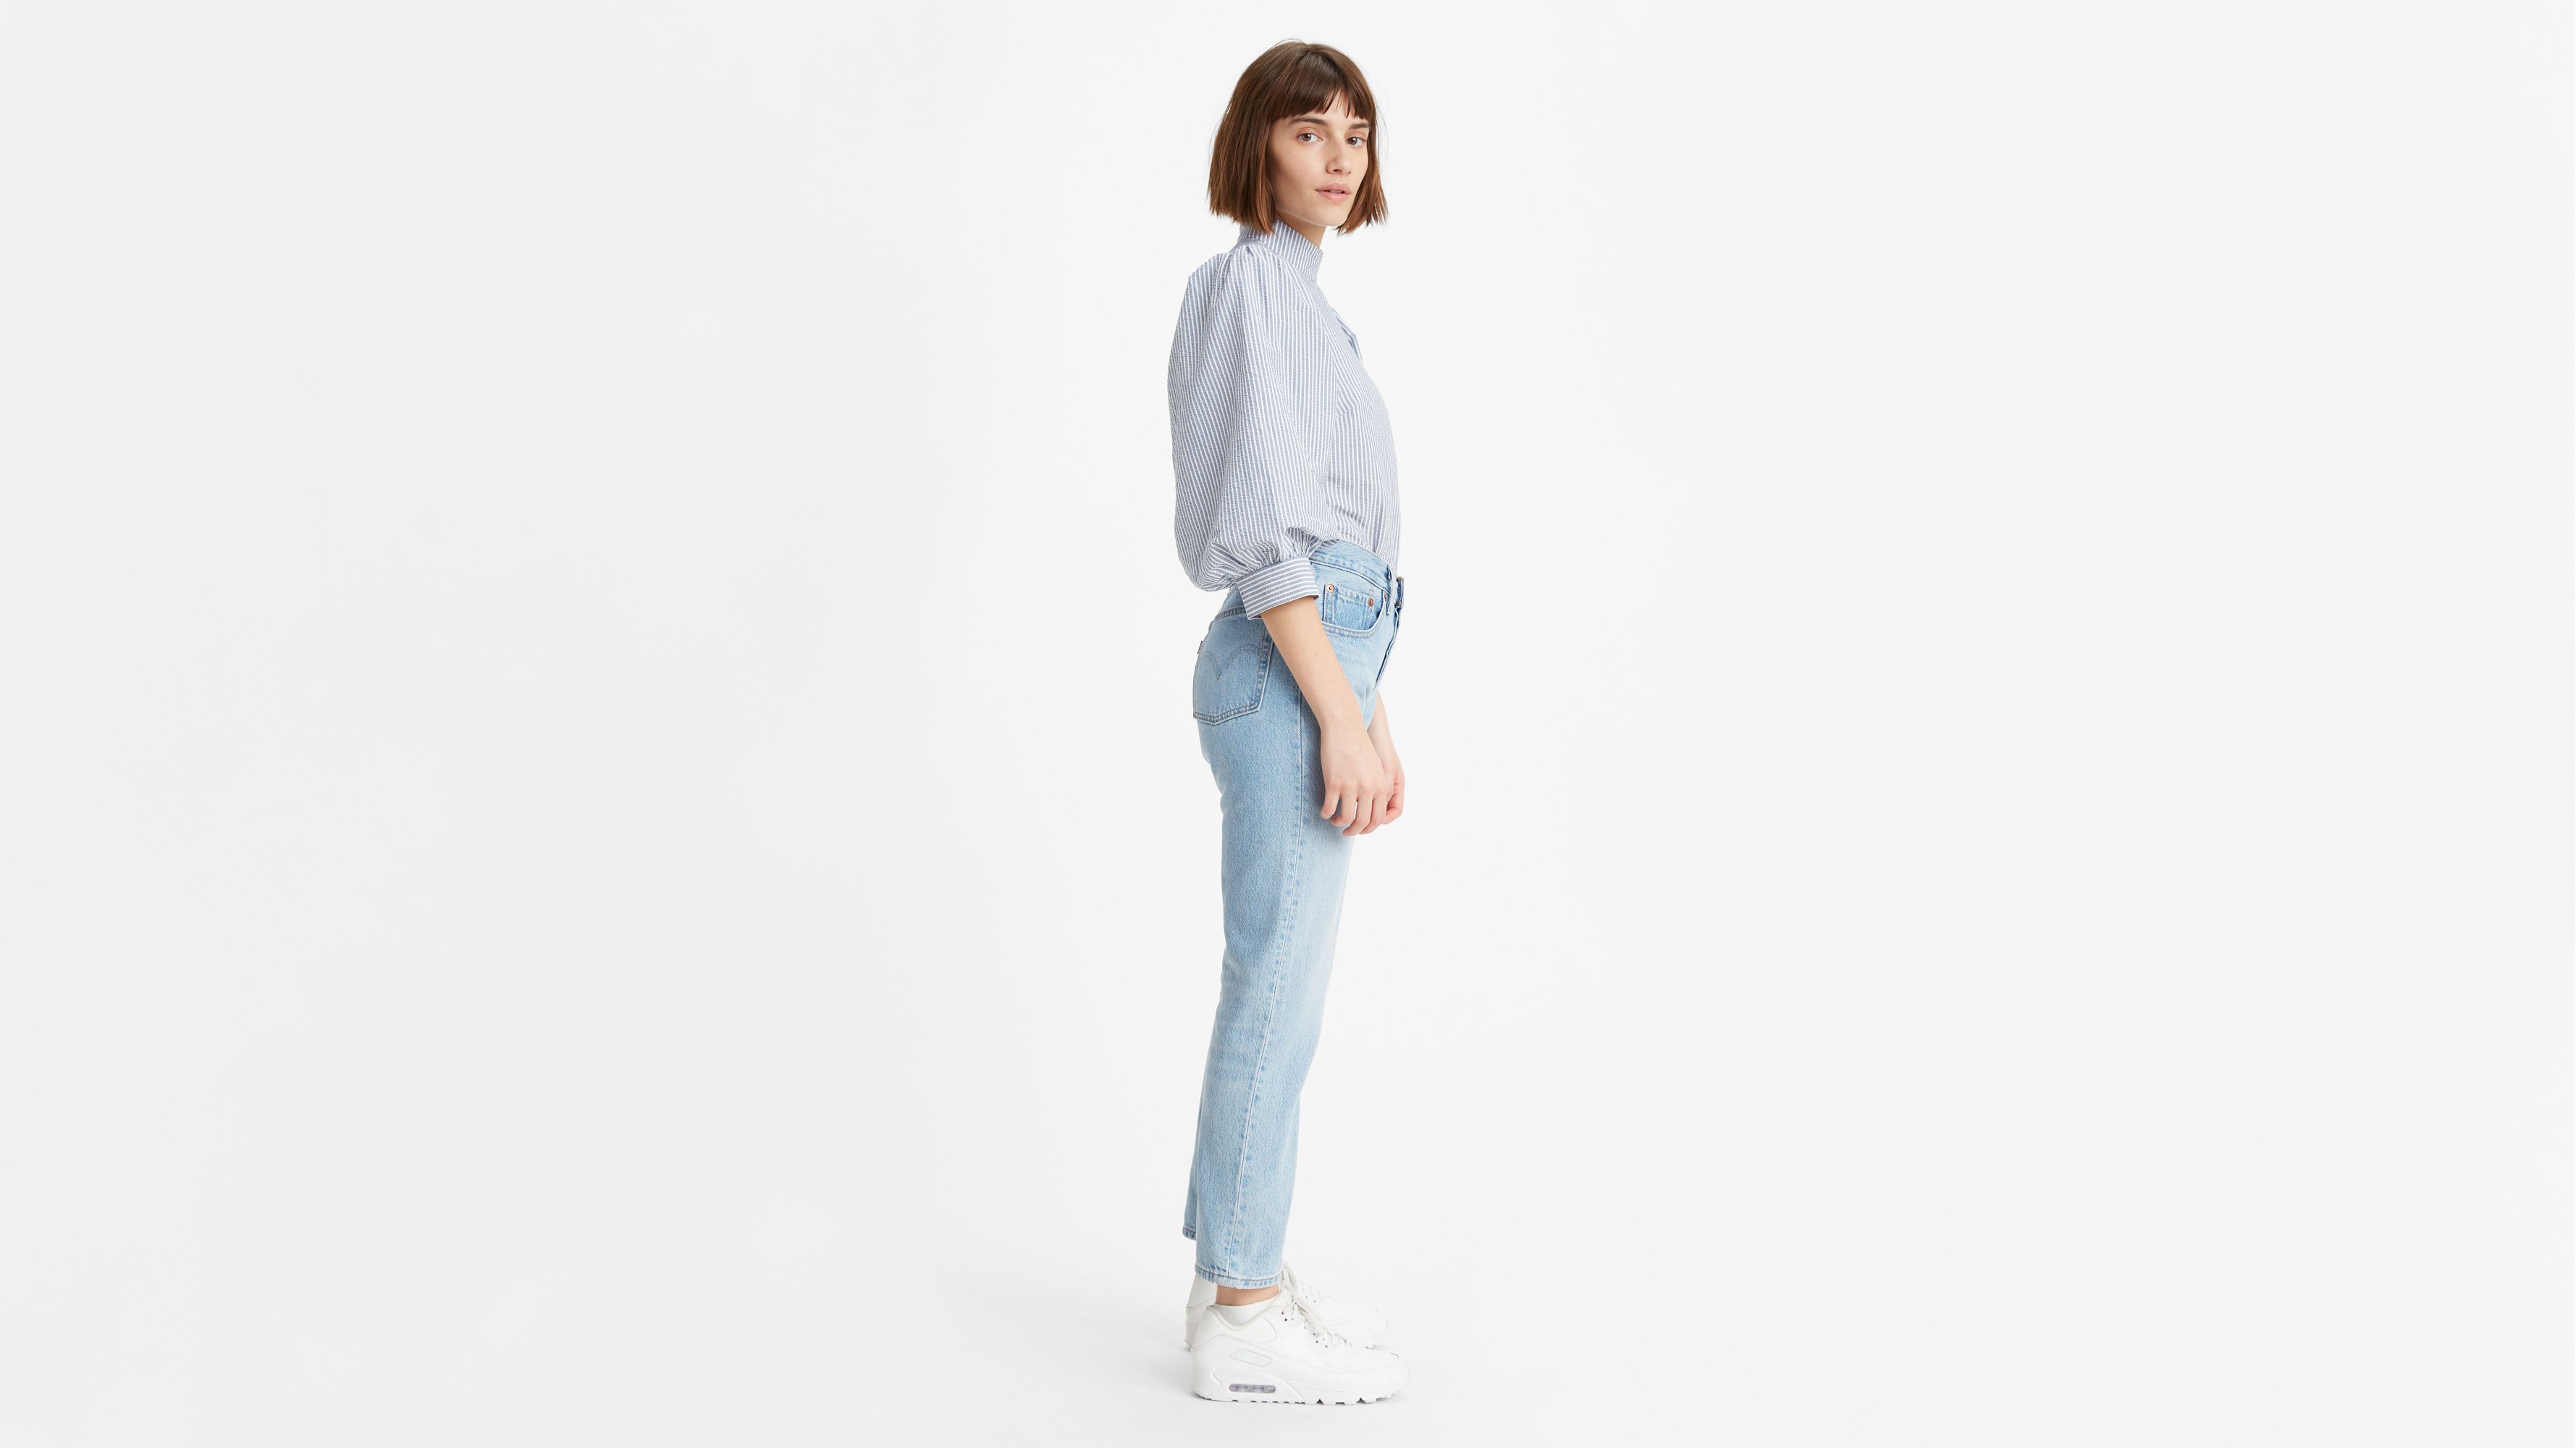 501 levi's cropped jeans